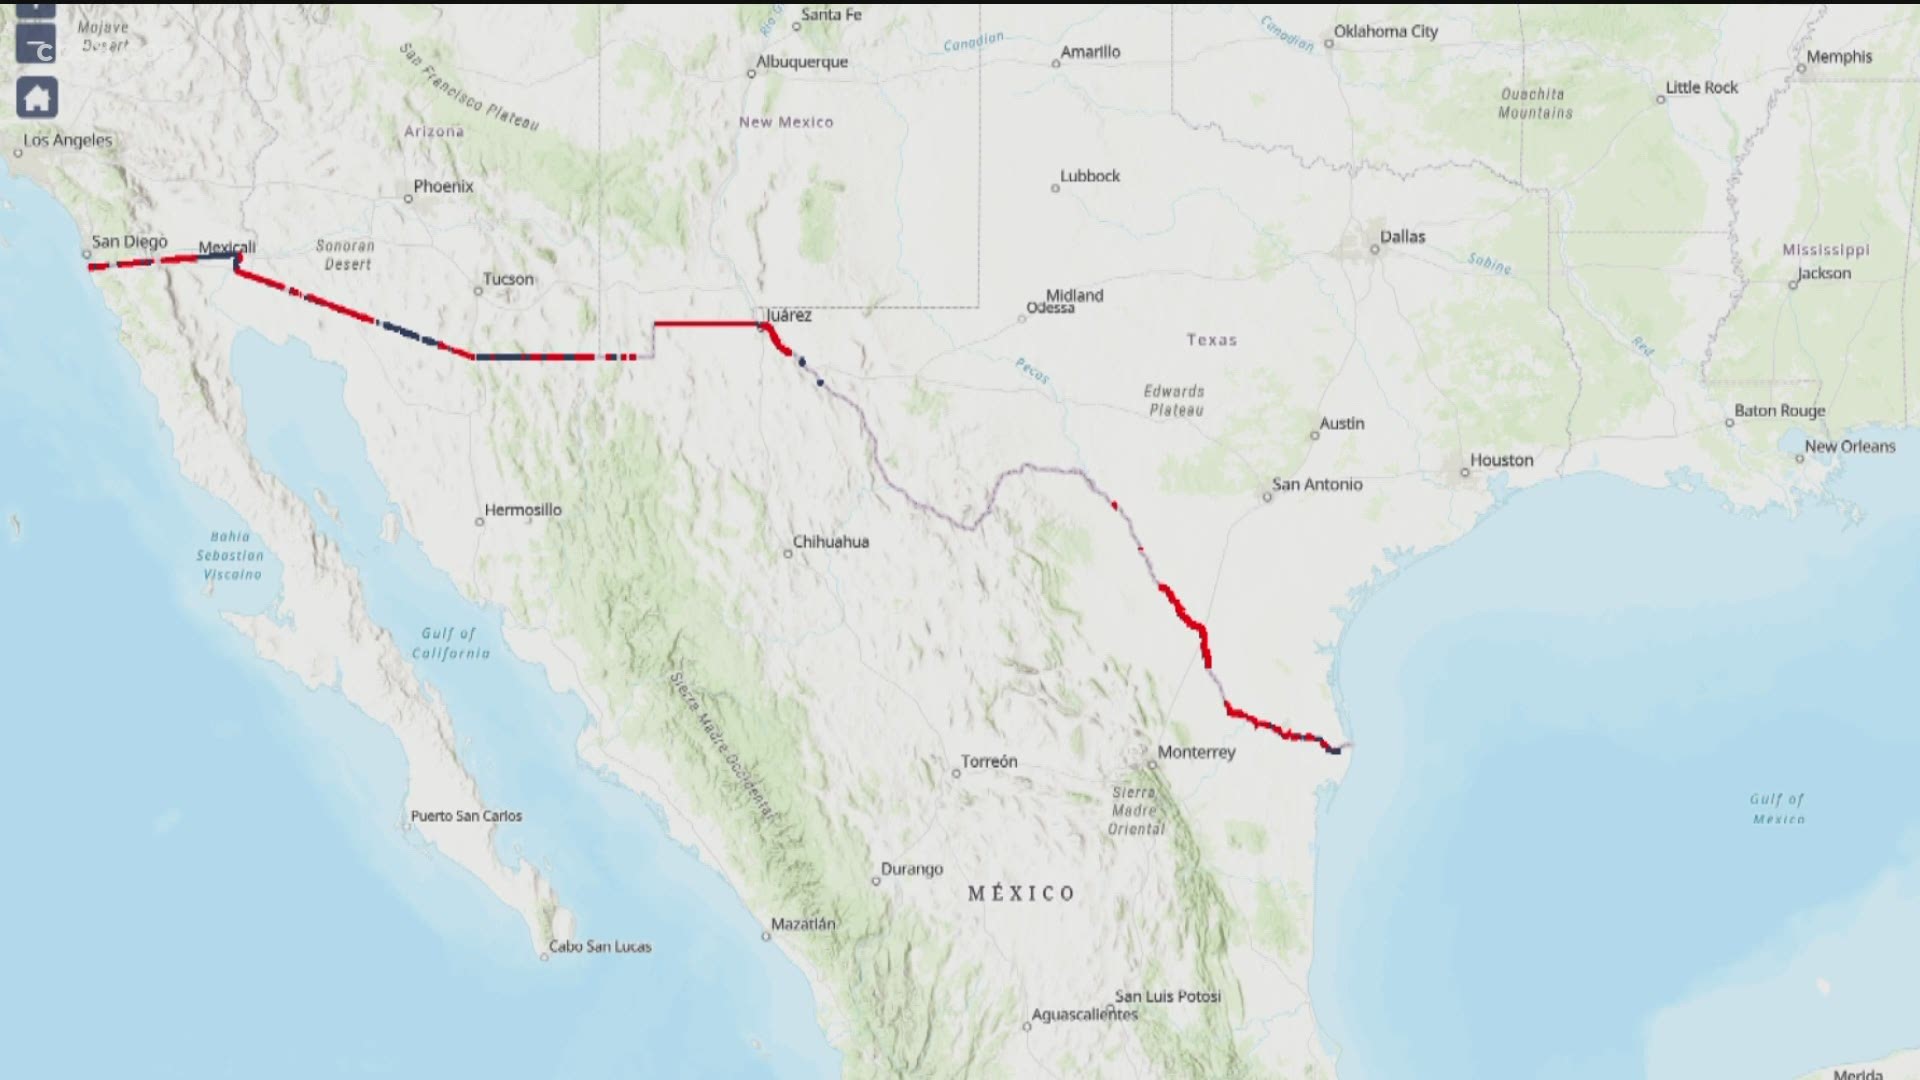 Since 2019, more than 340 miles of wall have been built using Pentagon funds, according to US Customs and Border Protection